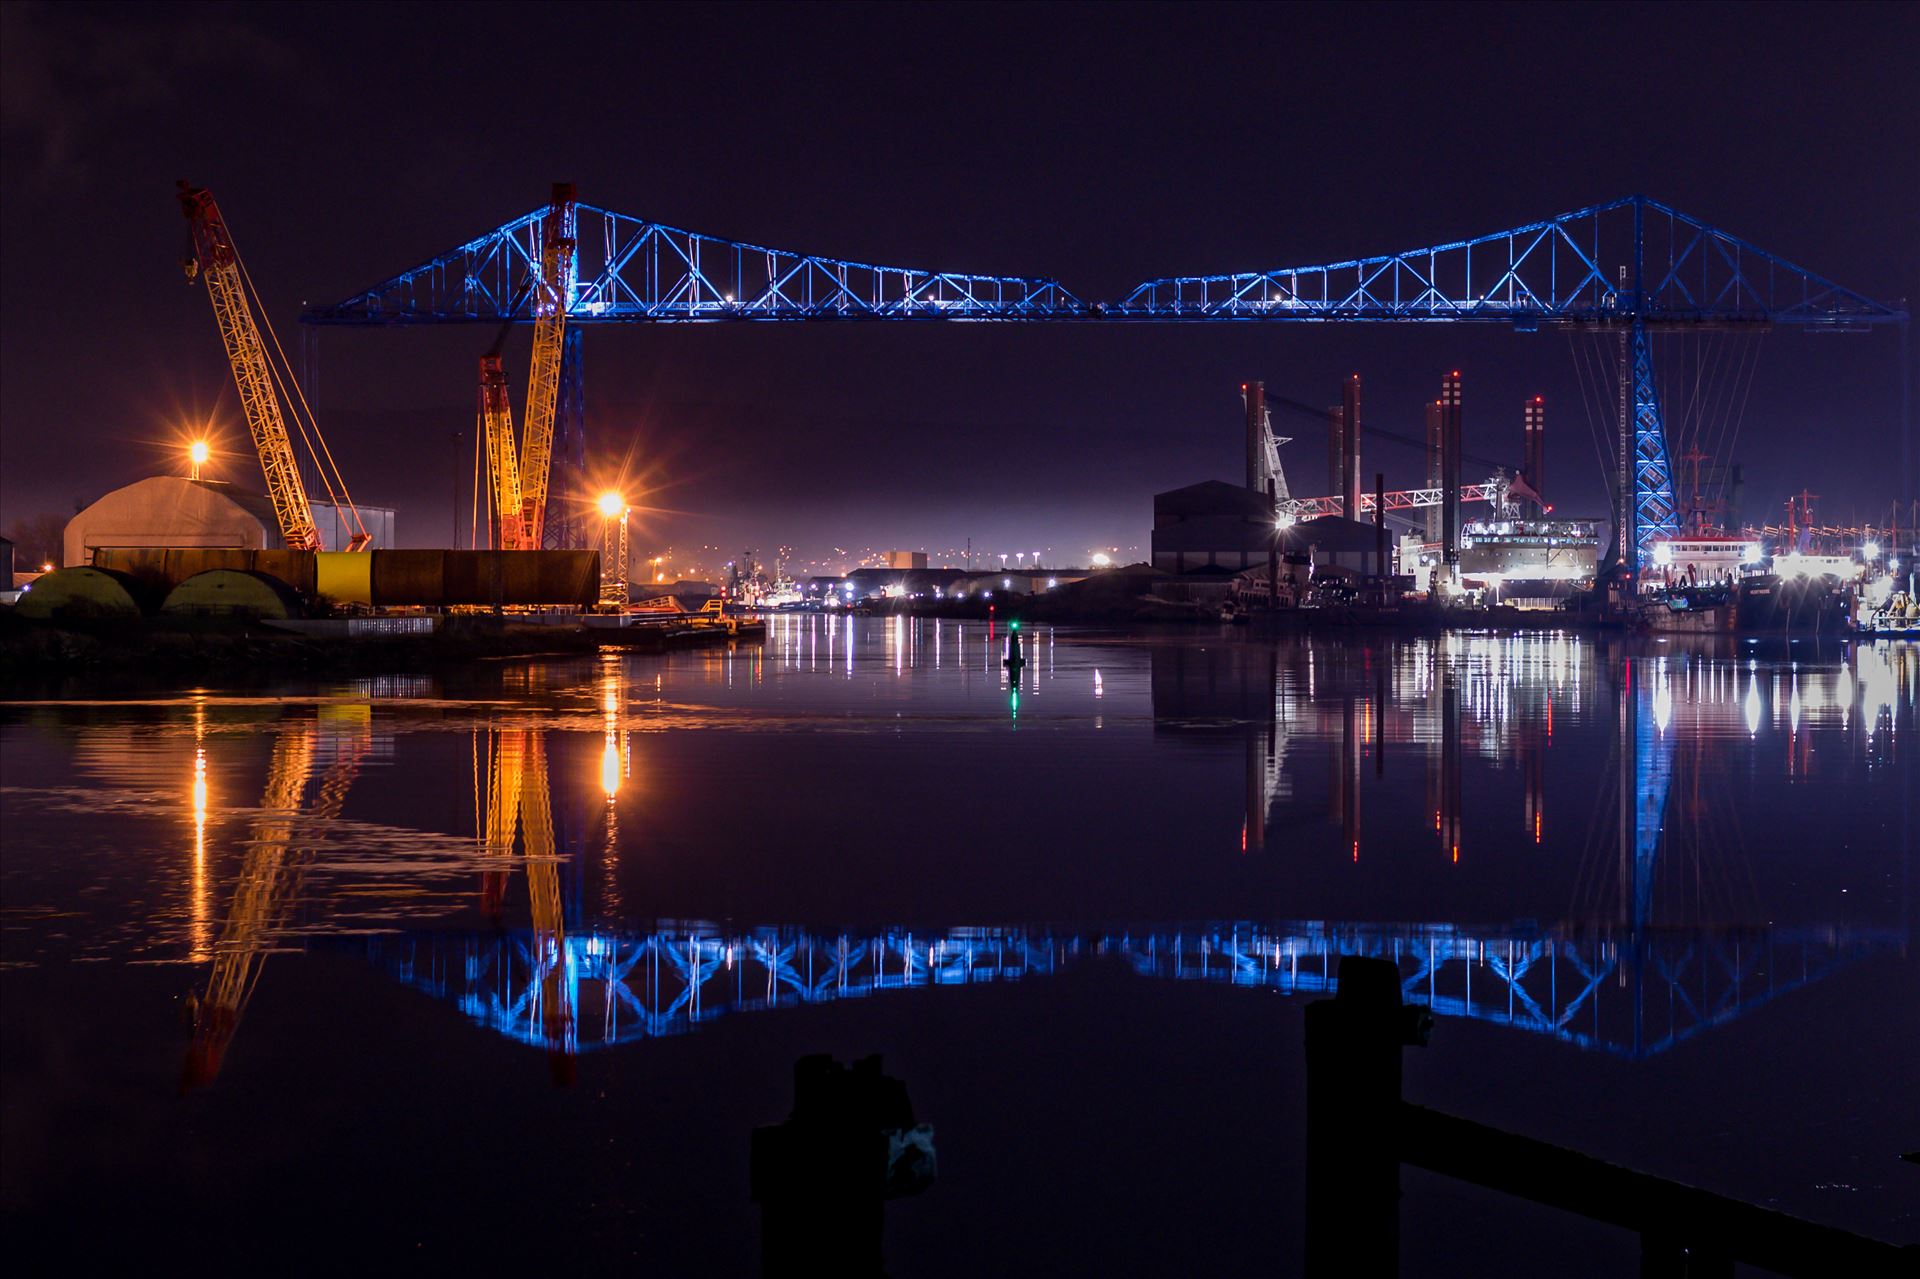 Transporter Bridge Reflections - The Transporter Bridge Reflection. To buy this image or many more of this iconic bridge, follow the link
https://www.clickasnap.com/i/ozo4f31dpbldx6zo by AJ Stoves Photography